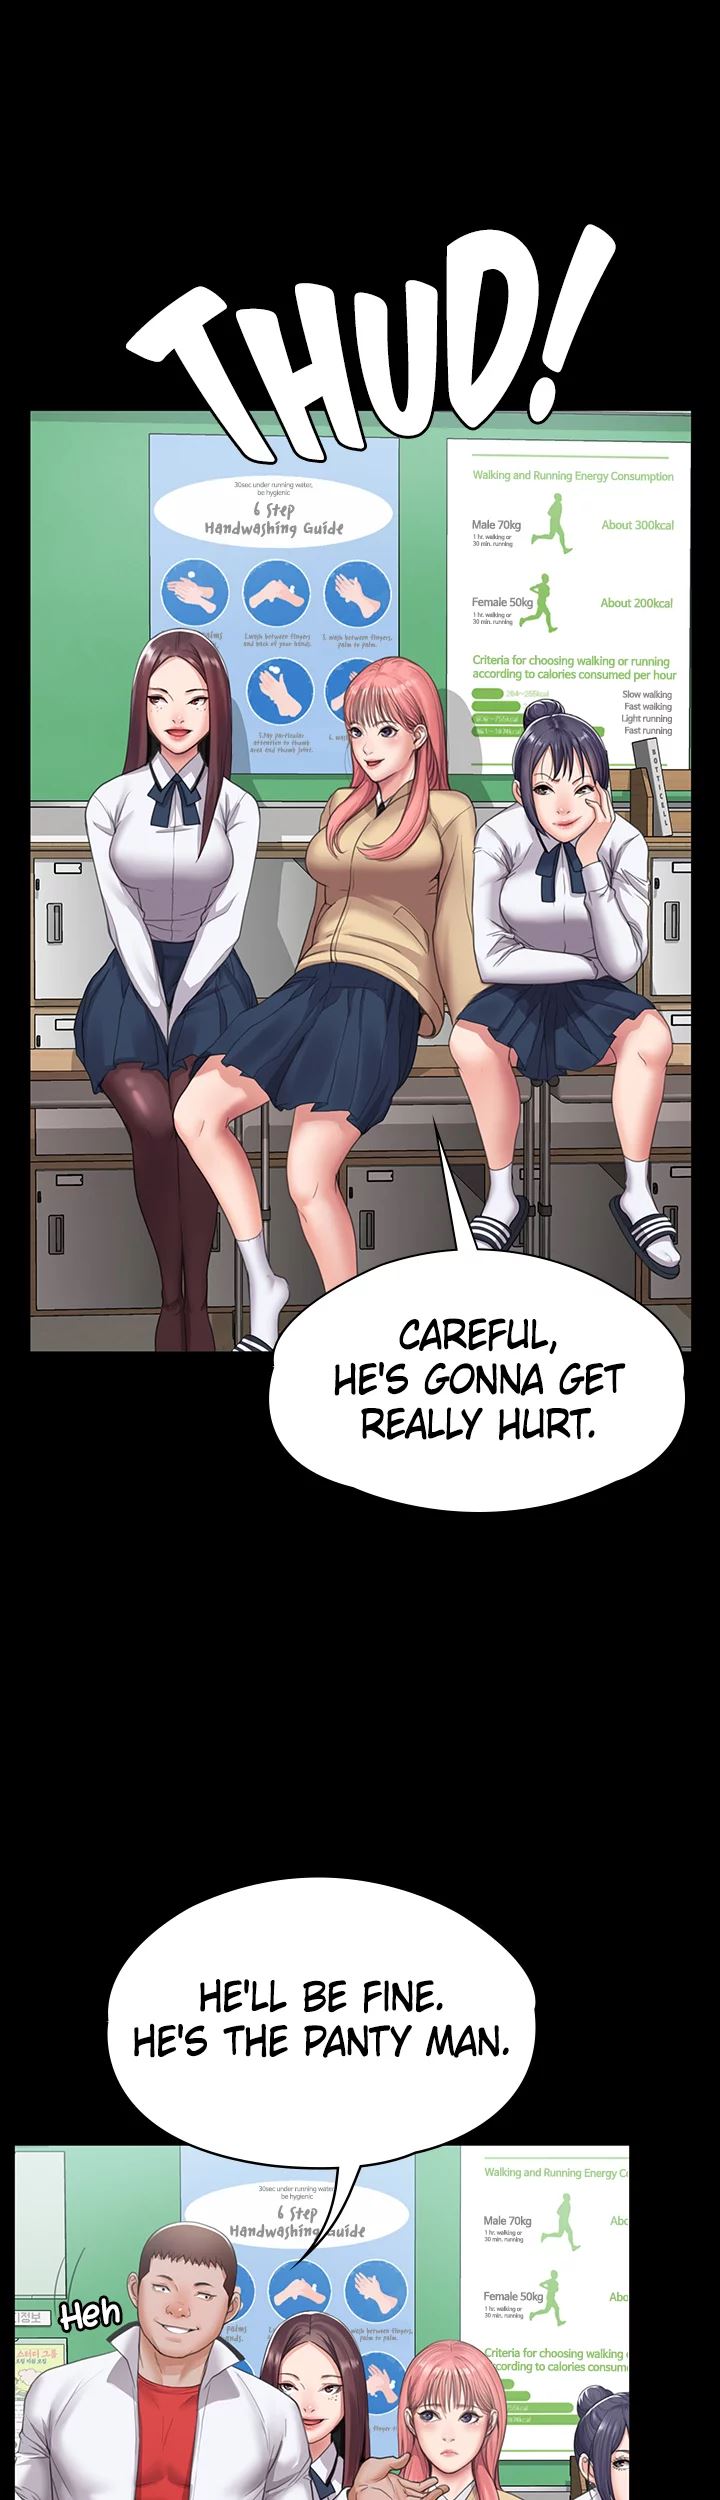 Bully Girl - Chapter 1 Page 8